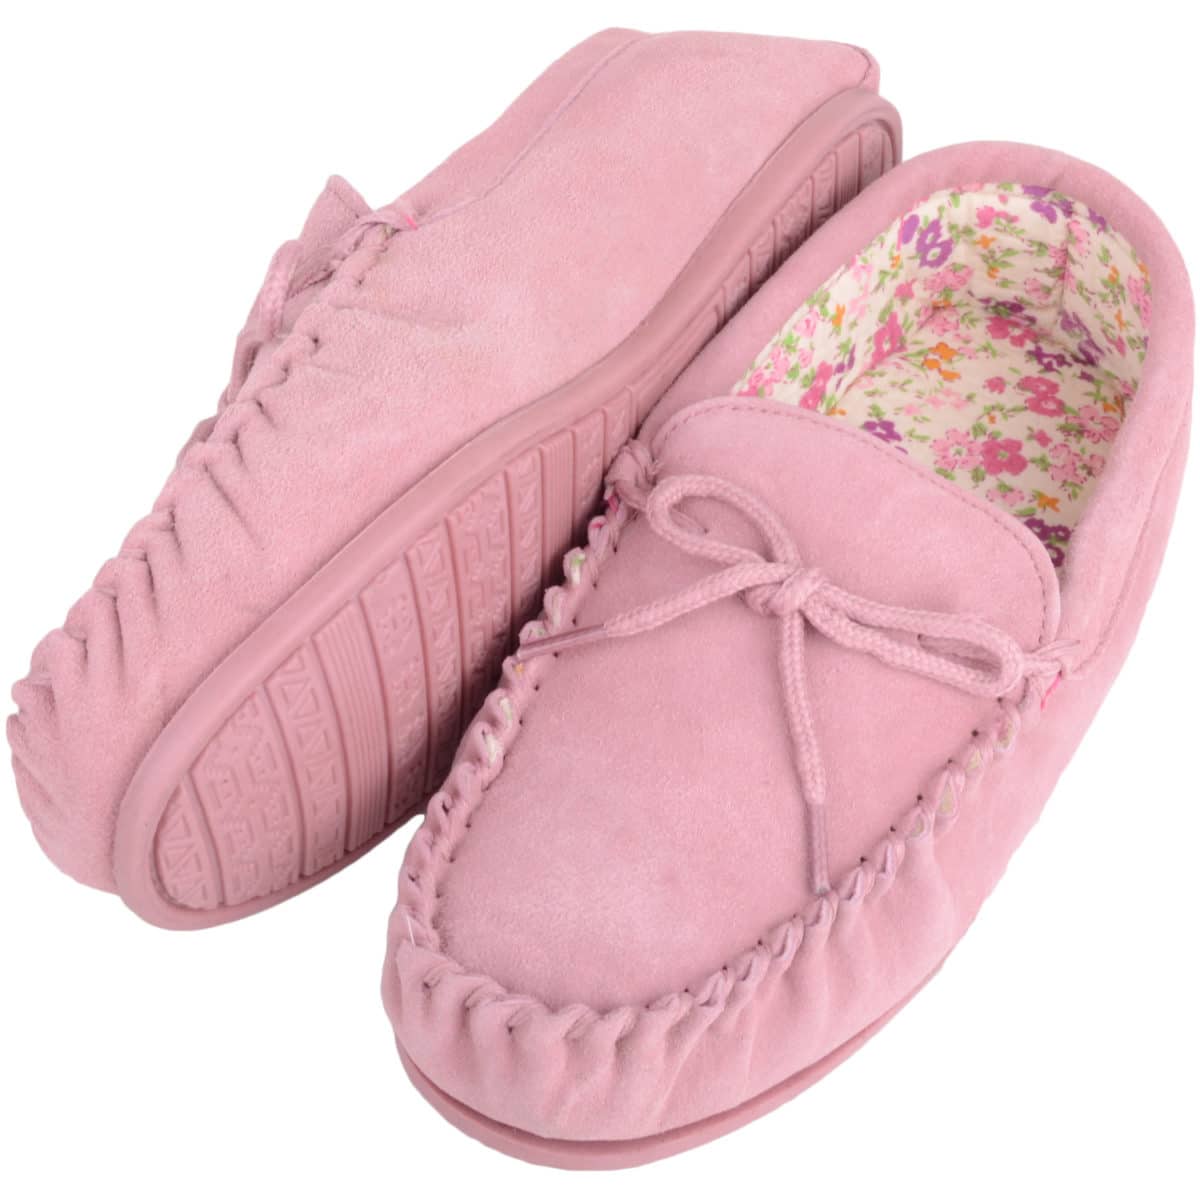 Ladies Moccasin Slipper - Suede Outer - Cotton Lining - From Snugrugs